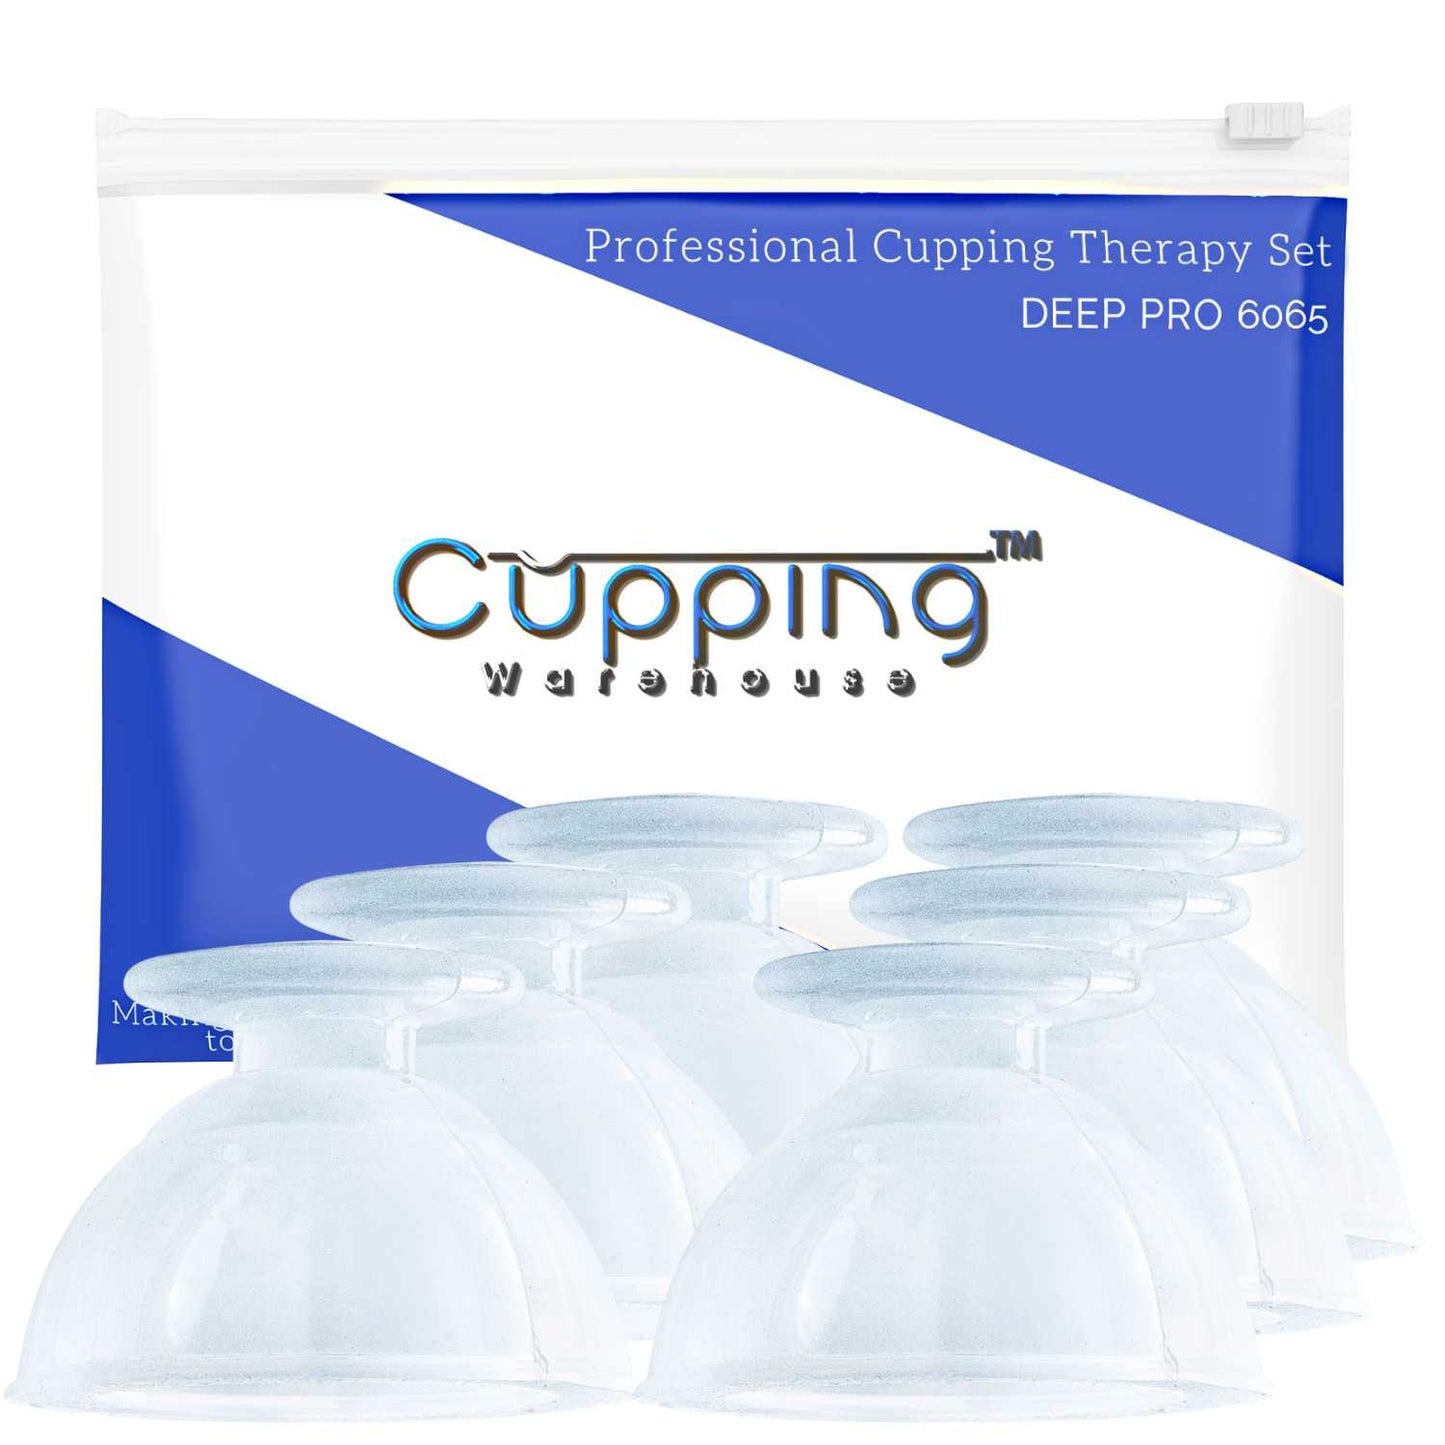 Deep Static Flip™ Cups 6065 Silicone Cupping Therapy Set for Pain- US,CA,MX,BR,AU,UK